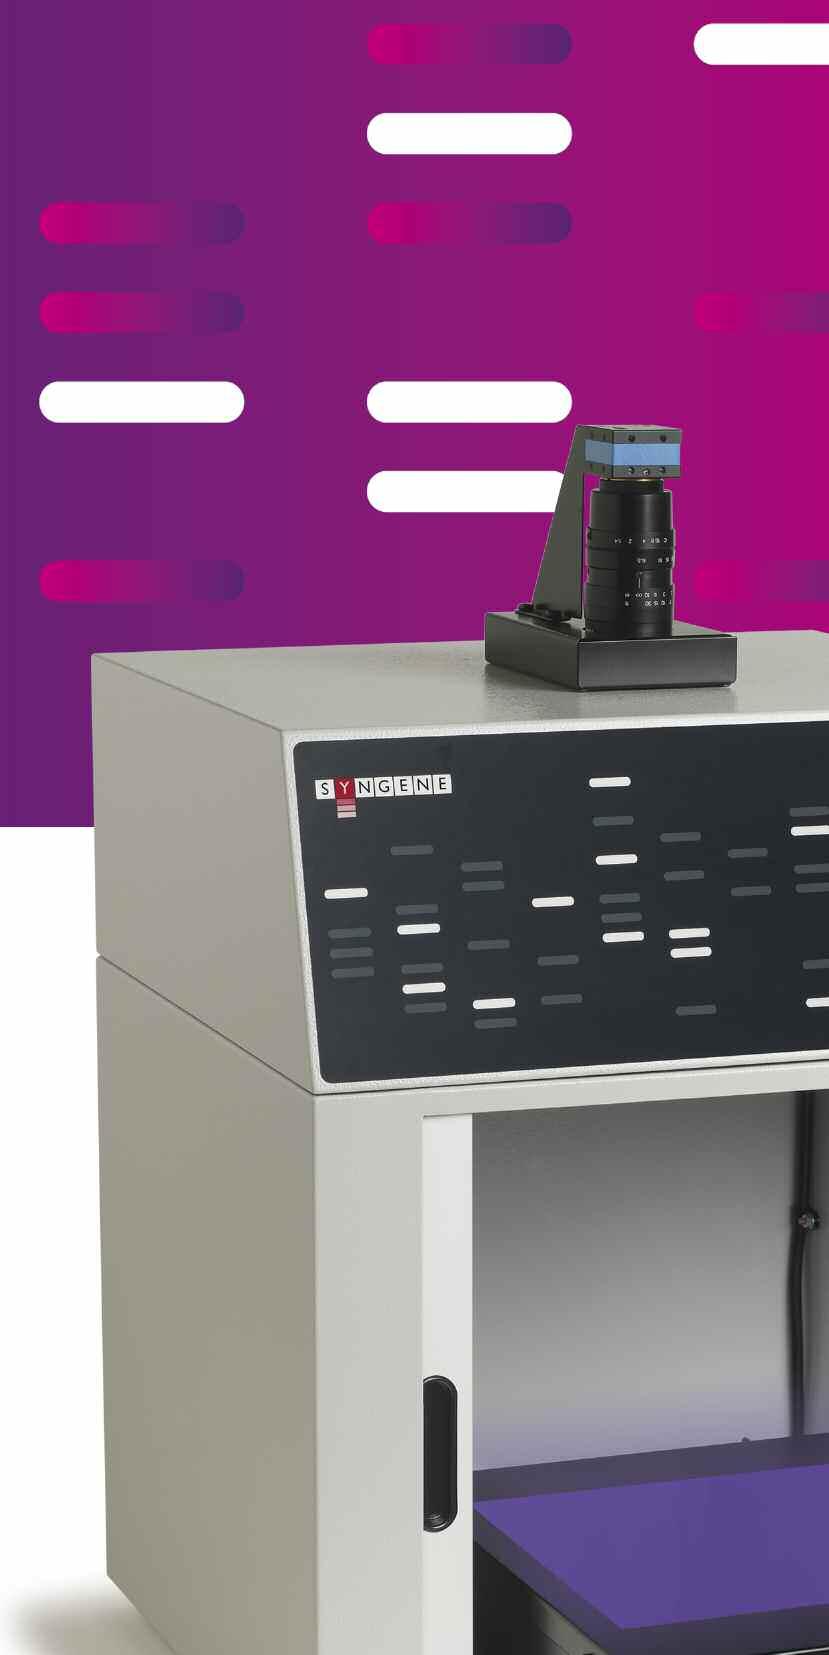 offers an affordable route to gel capture and analysis.